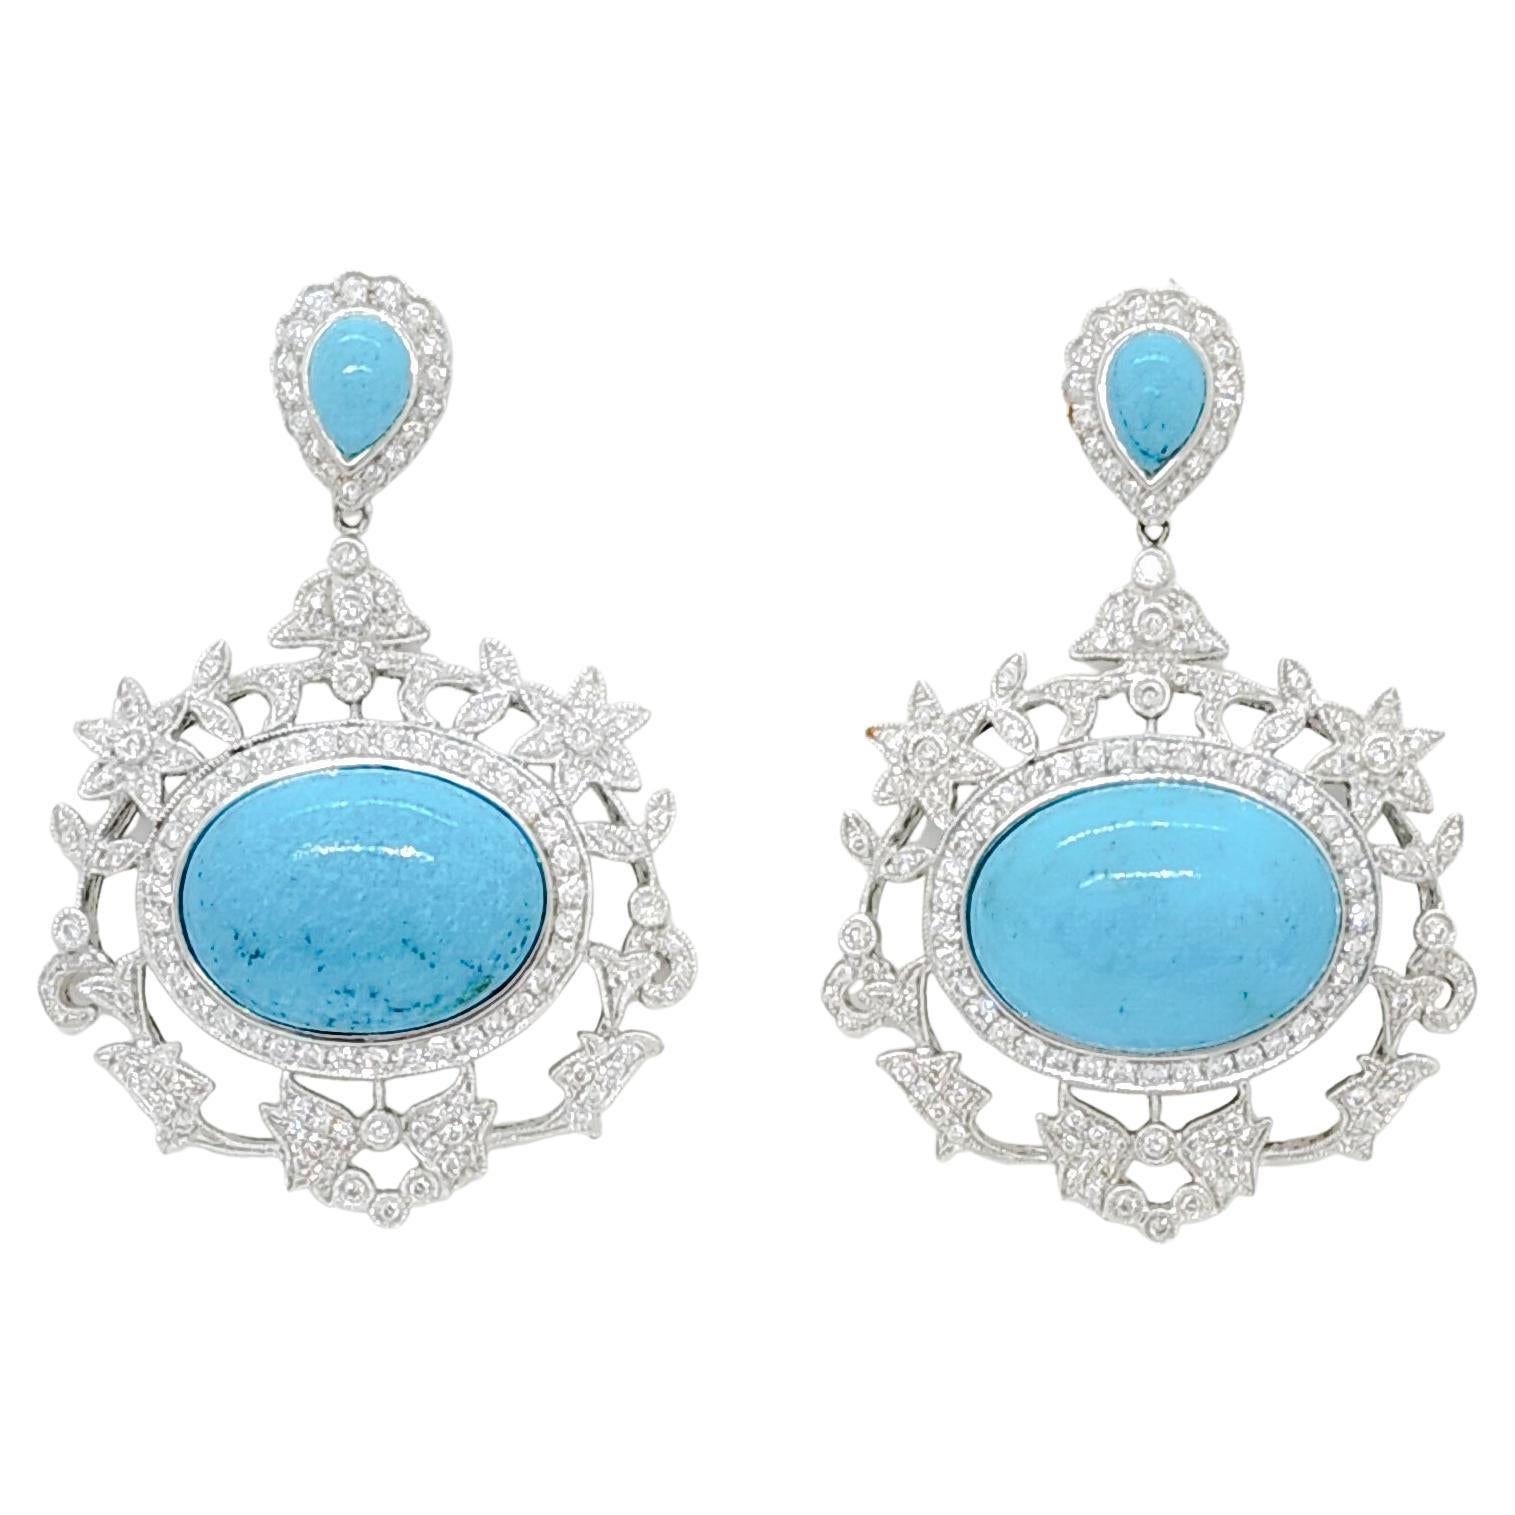 Turquoise and White Diamond Dangle Earrings in 18k White Gold